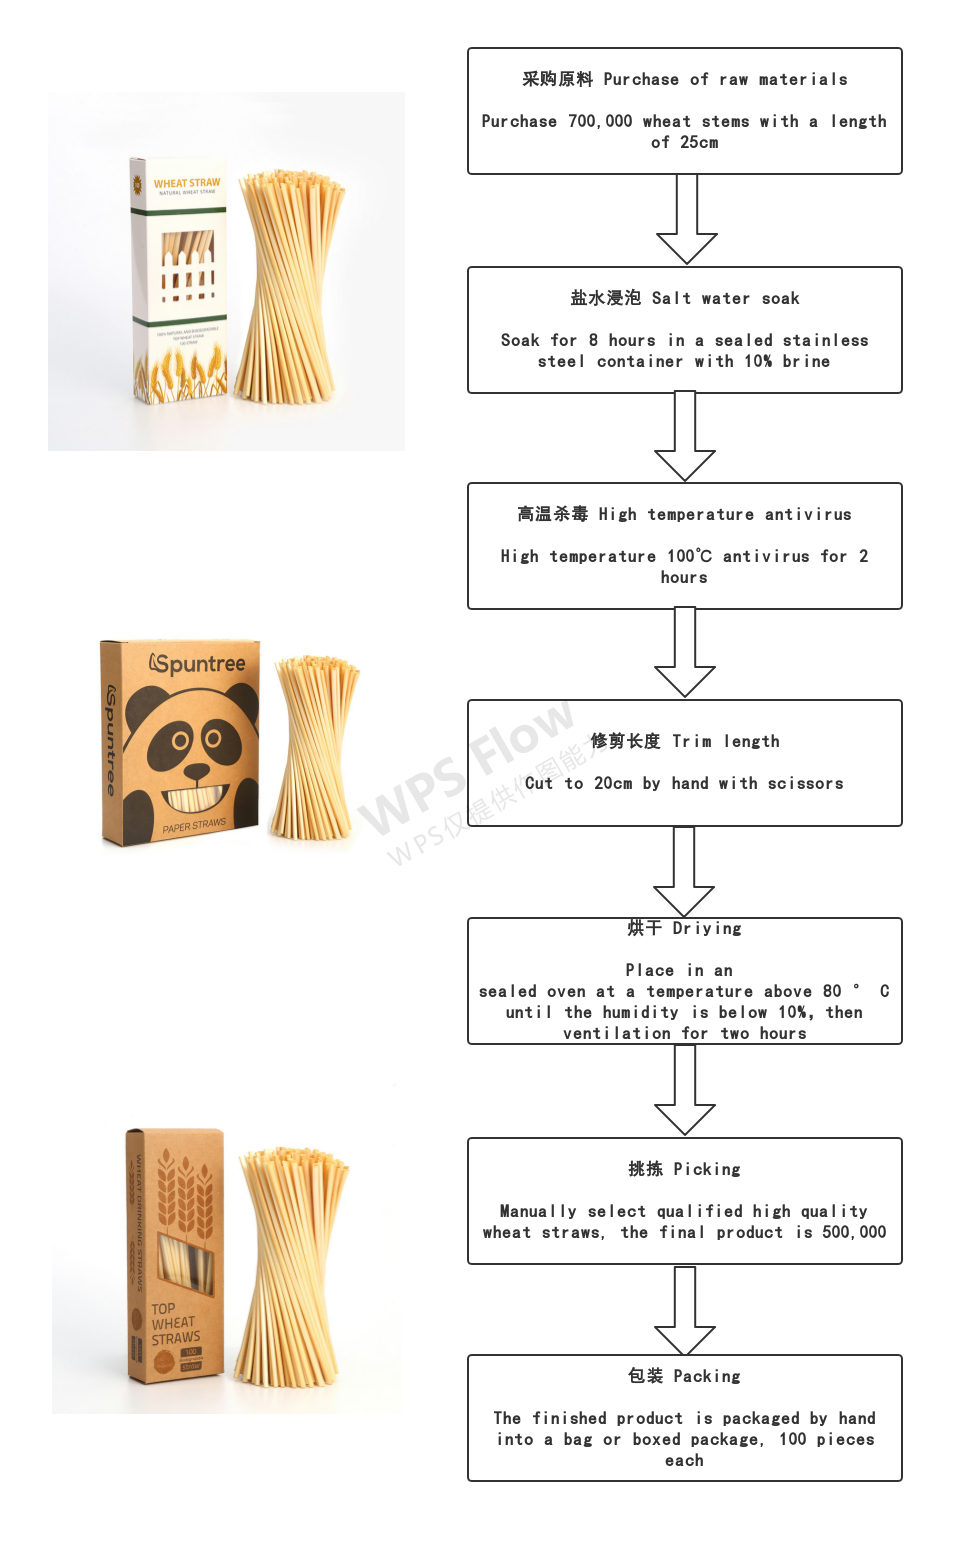 How is the wheat straw made?